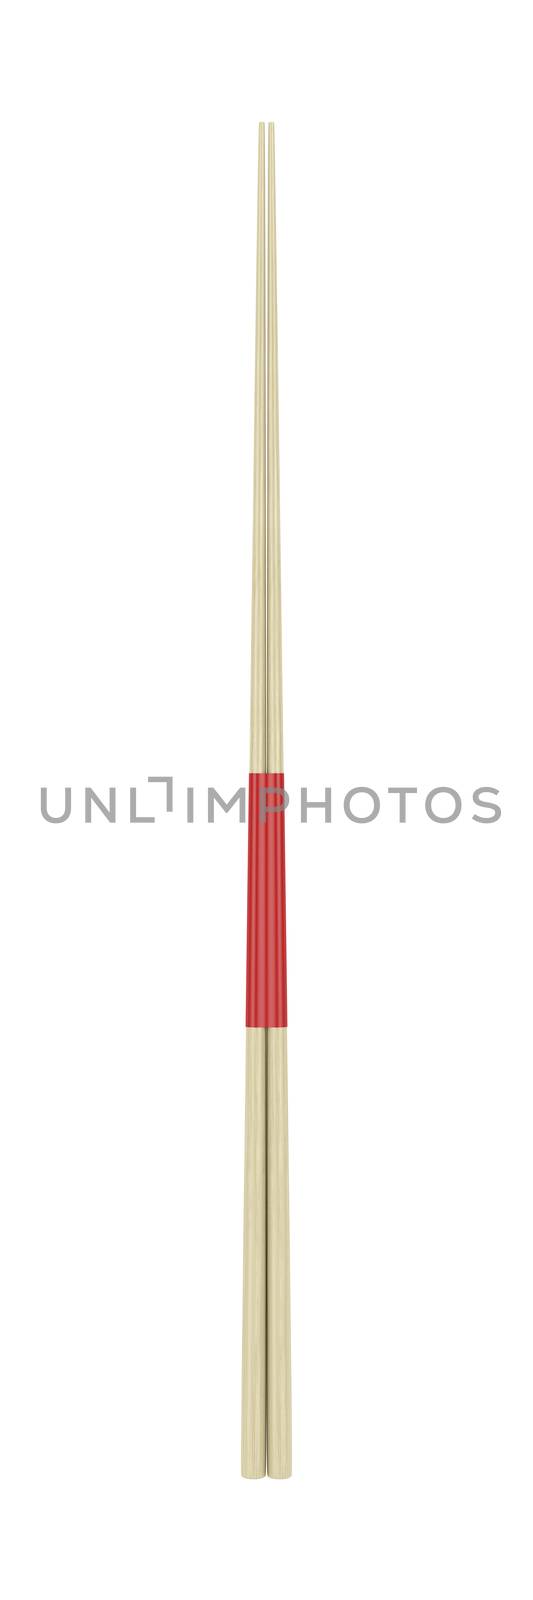 Wooden chopsticks on white
 by magraphics